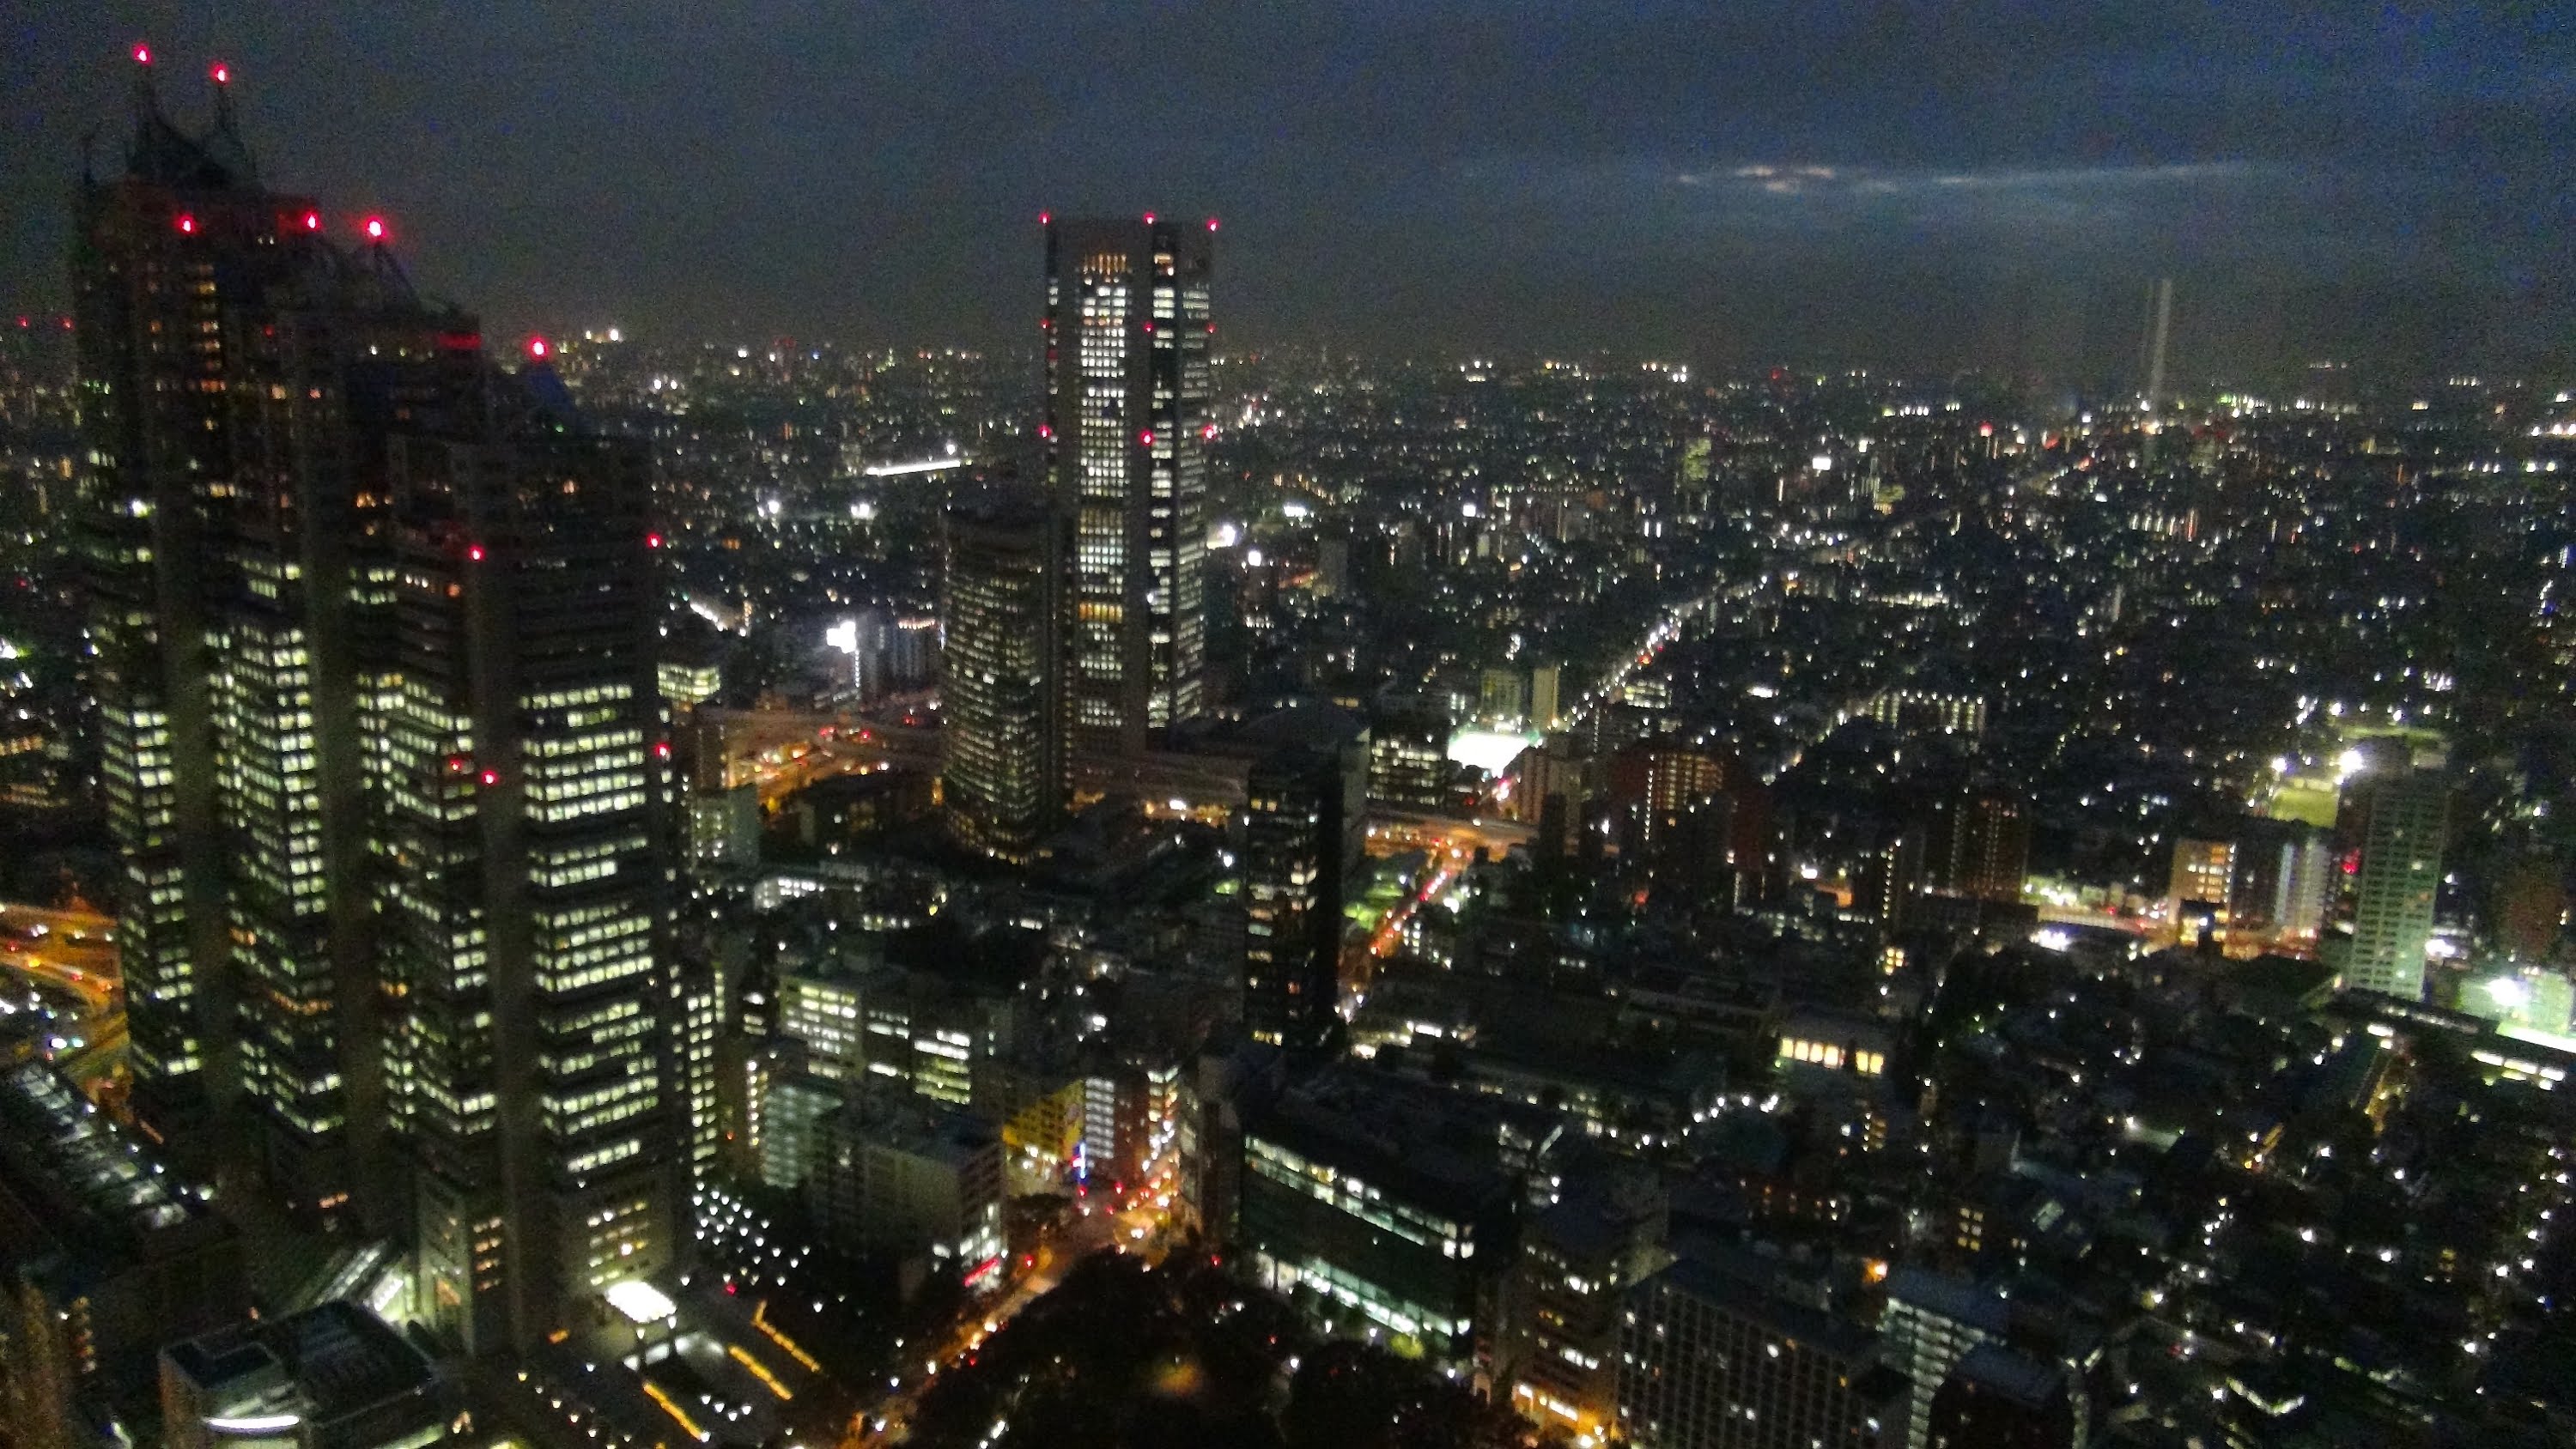 Night Tokyo view from City Hall, Tokyo, Japan - YouTube